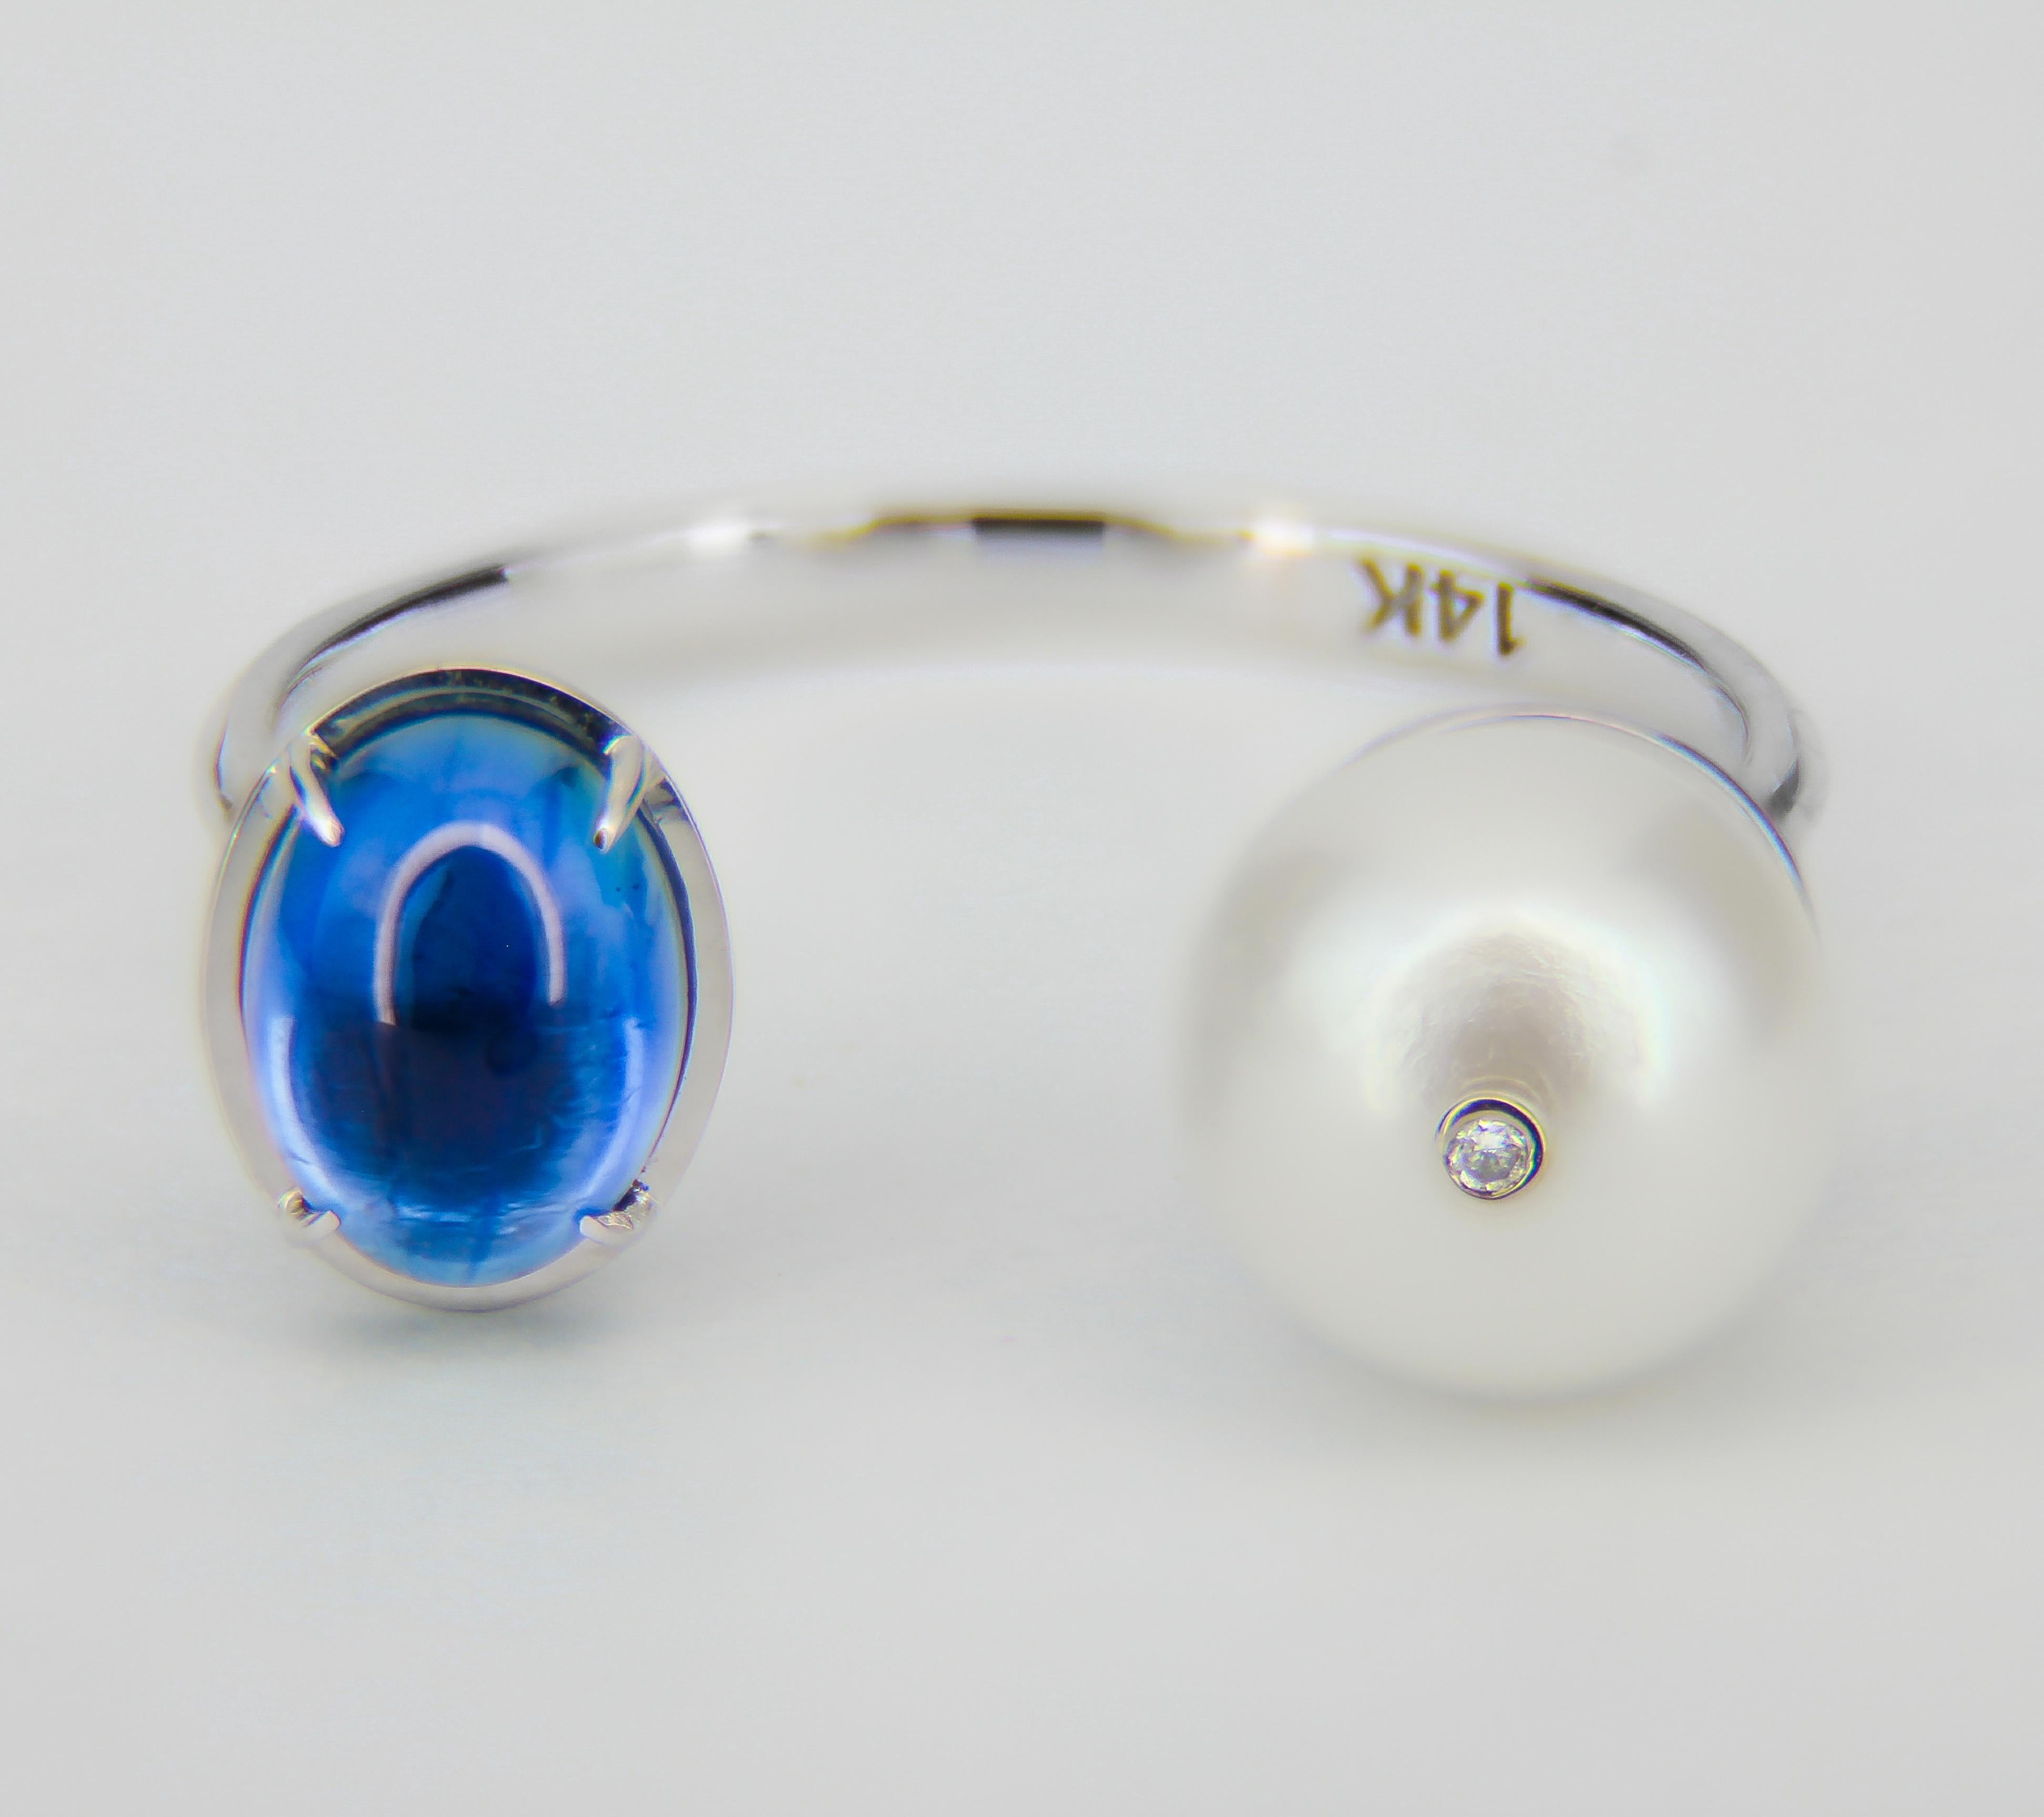 14k gold ring with sapphire, pearl and diamond. September birthstone.
Weight: 2.50 g.

Central stones: Natural sapphire
Weight - approx 1.00 ct in total, color - blue, oval cabochon cut.
Clarity: Transparent with inclusions
Side stones:
Pearl: 6.5